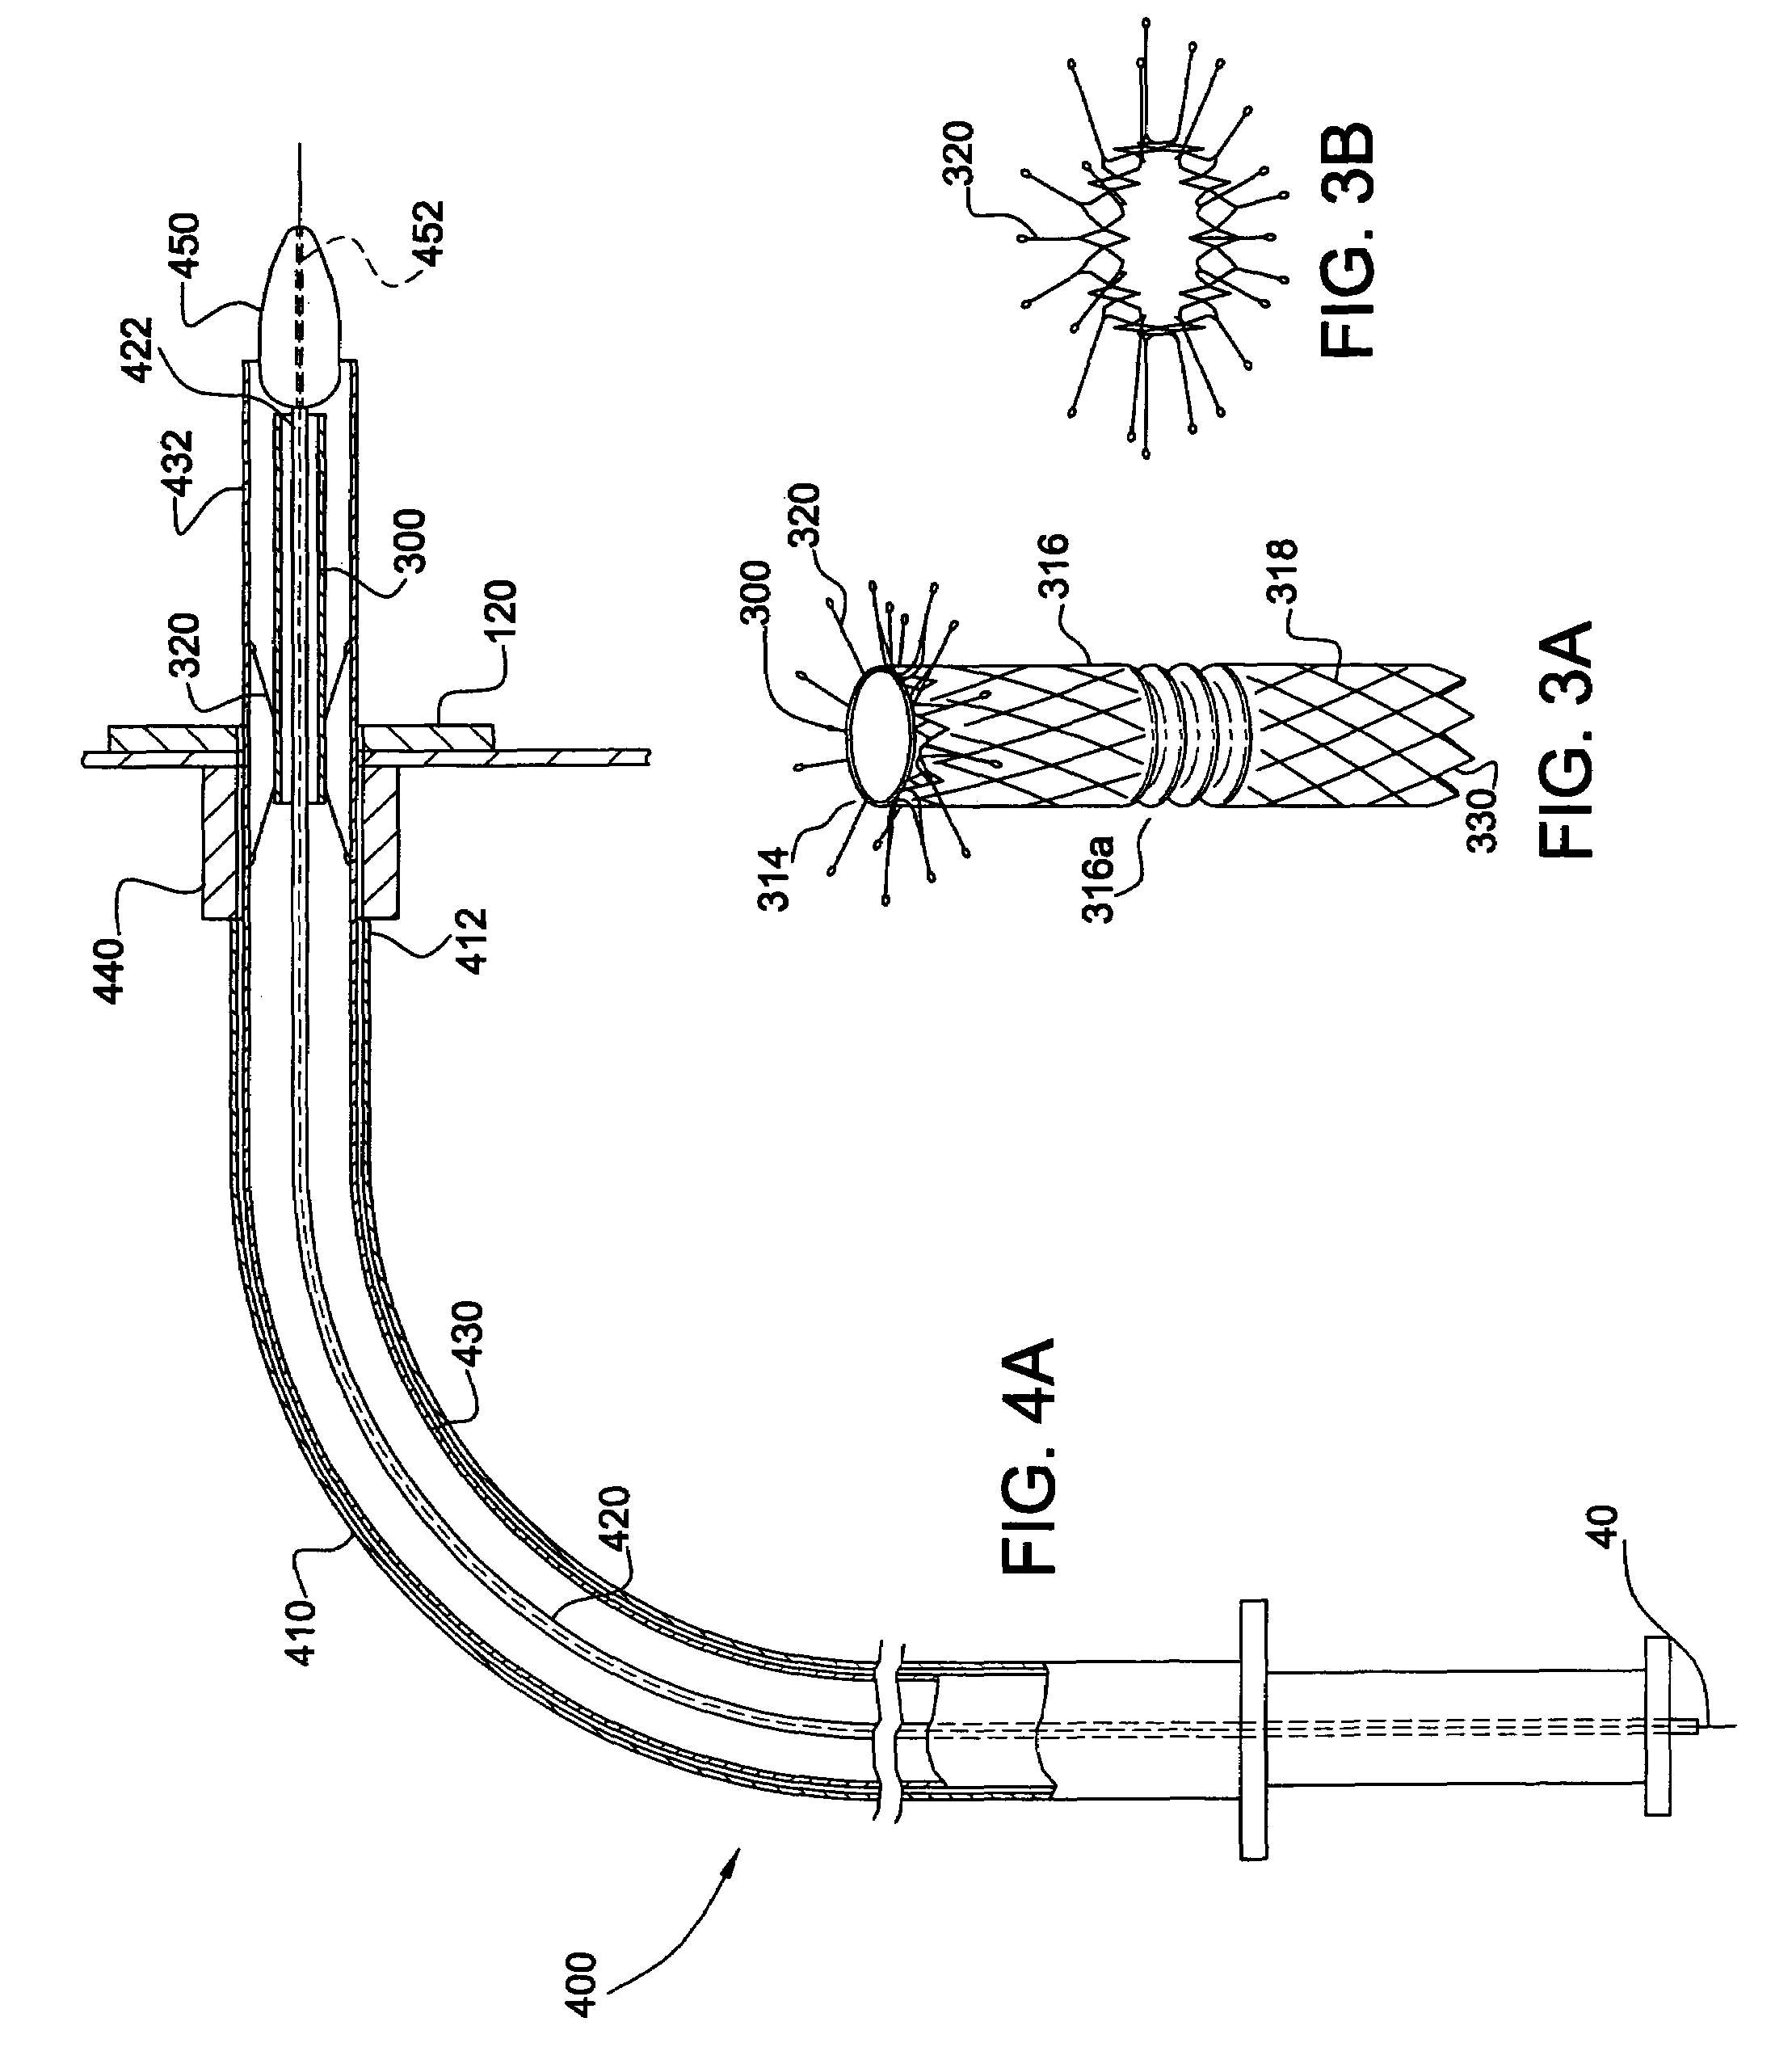 System and method for endoluminal grafting of bifurcated and branched vessels